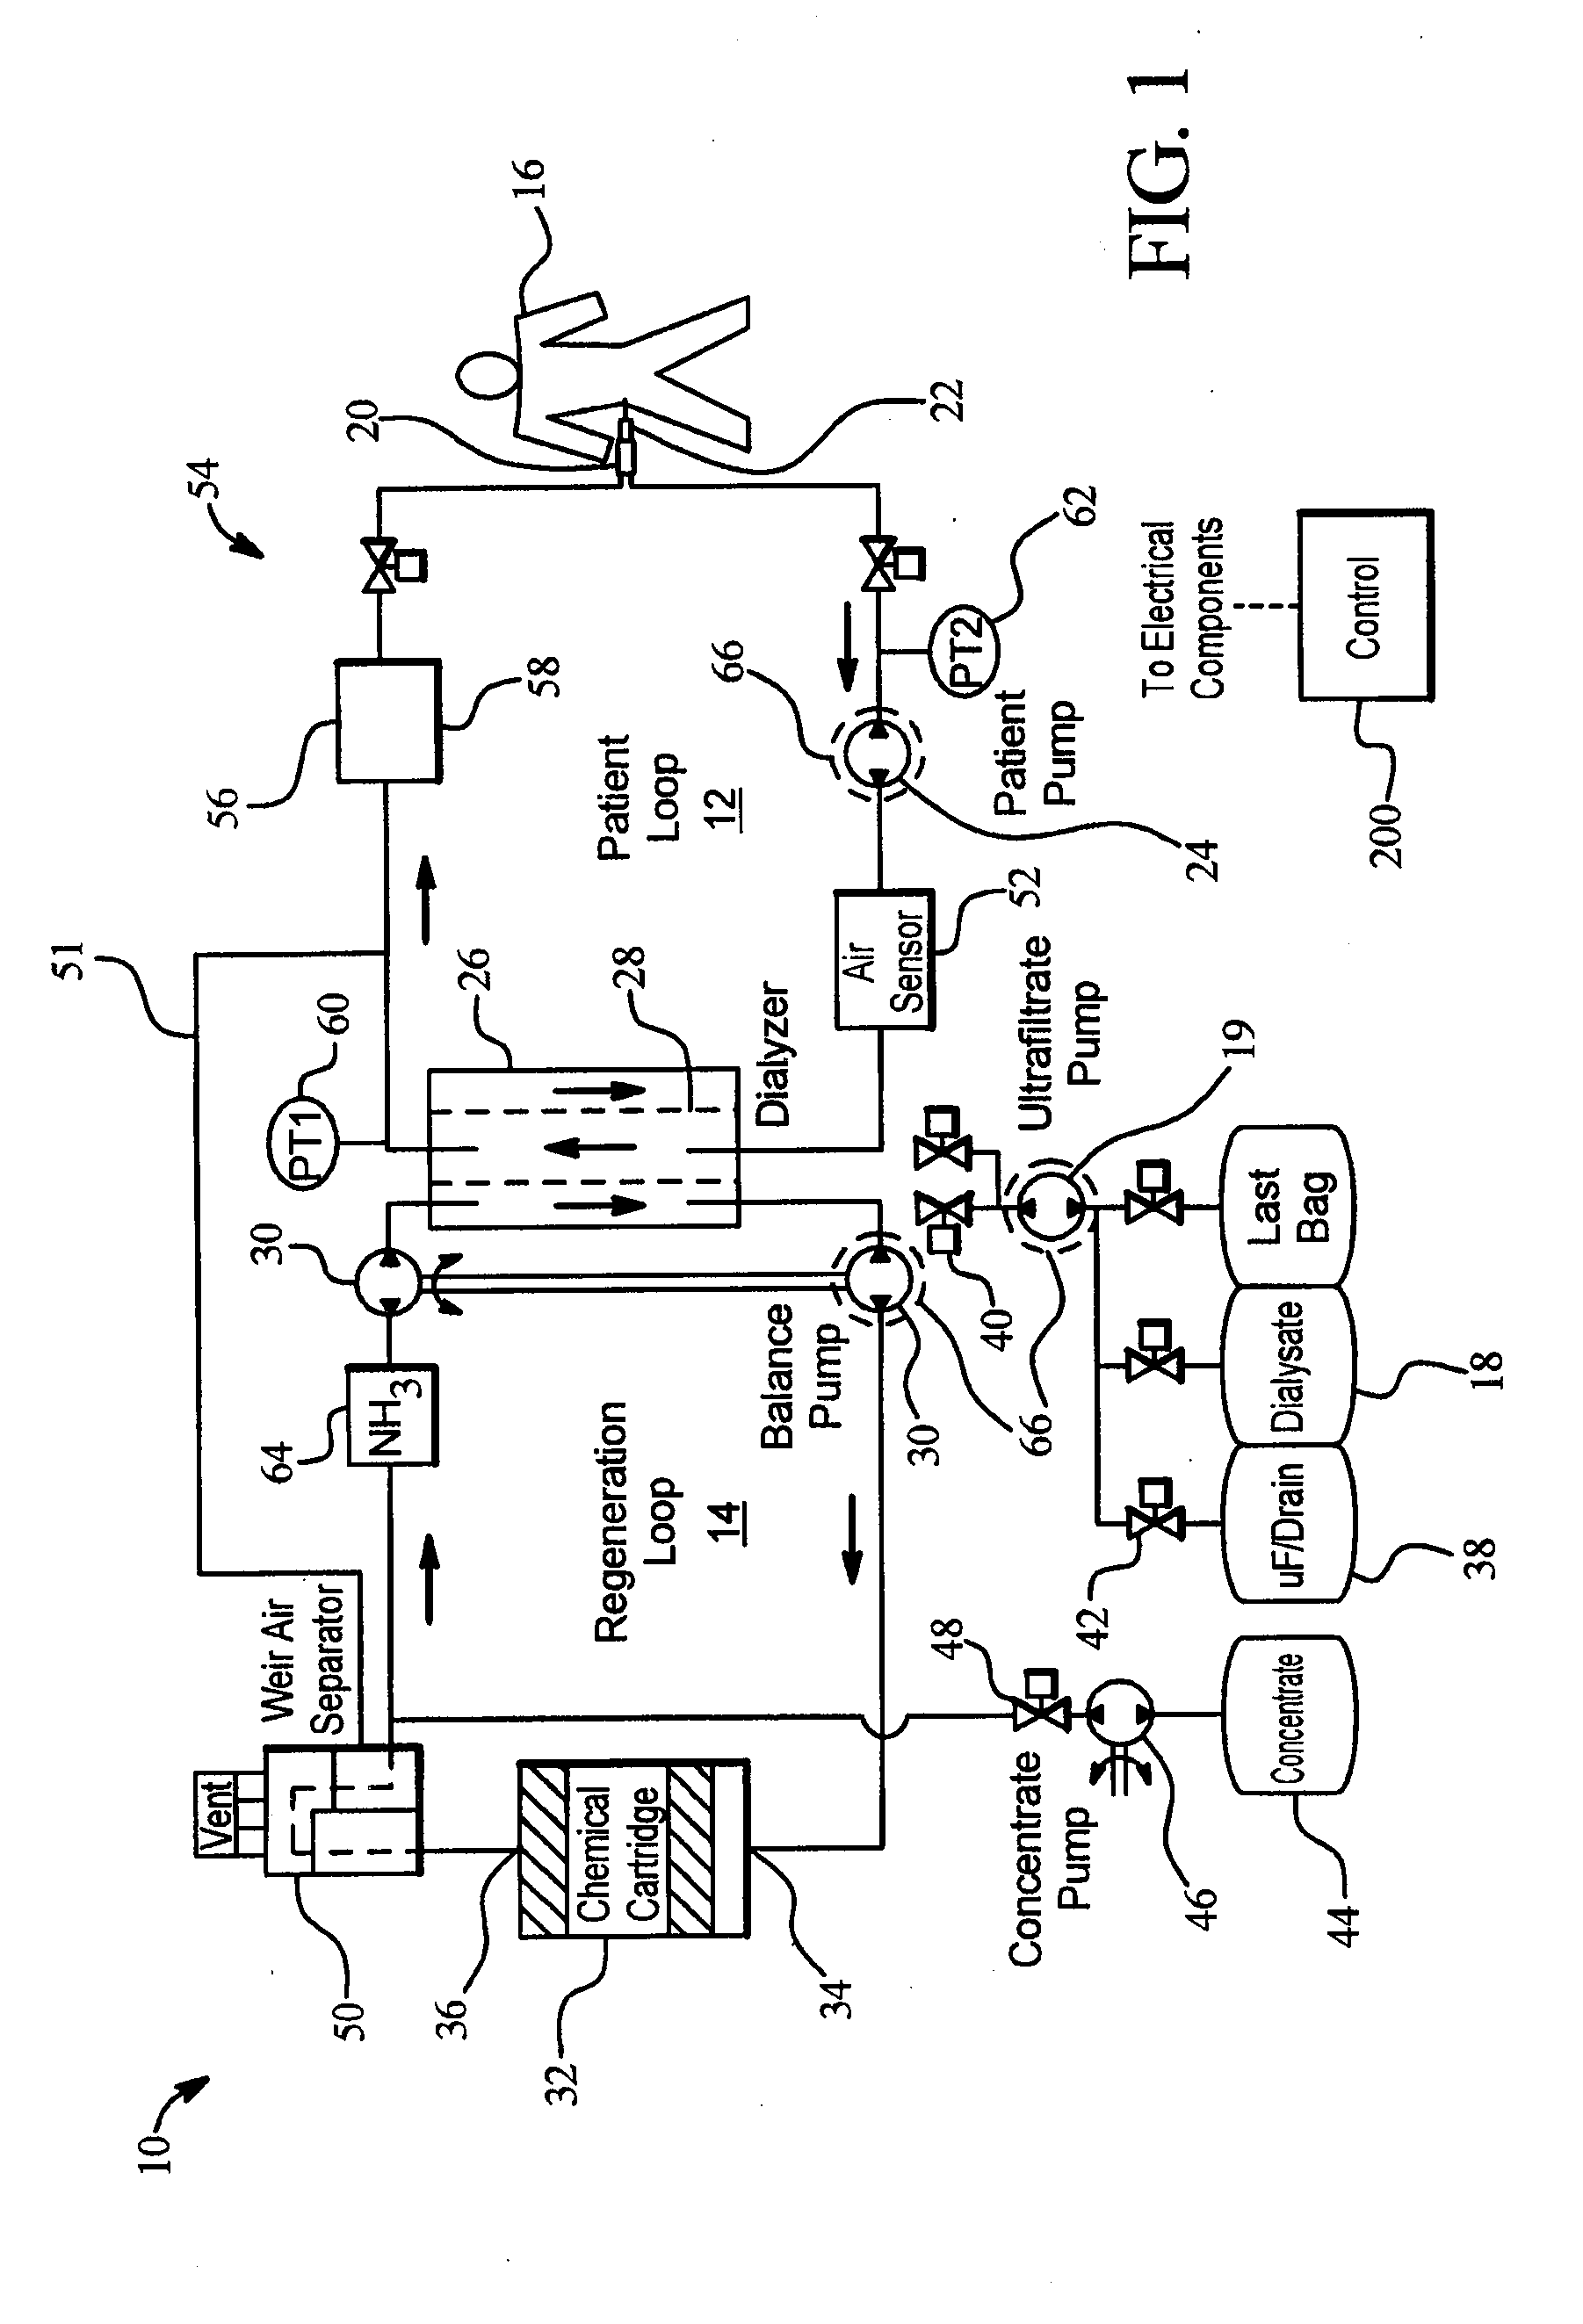 Weight/sensor-controlled sorbent system for hemodialysis